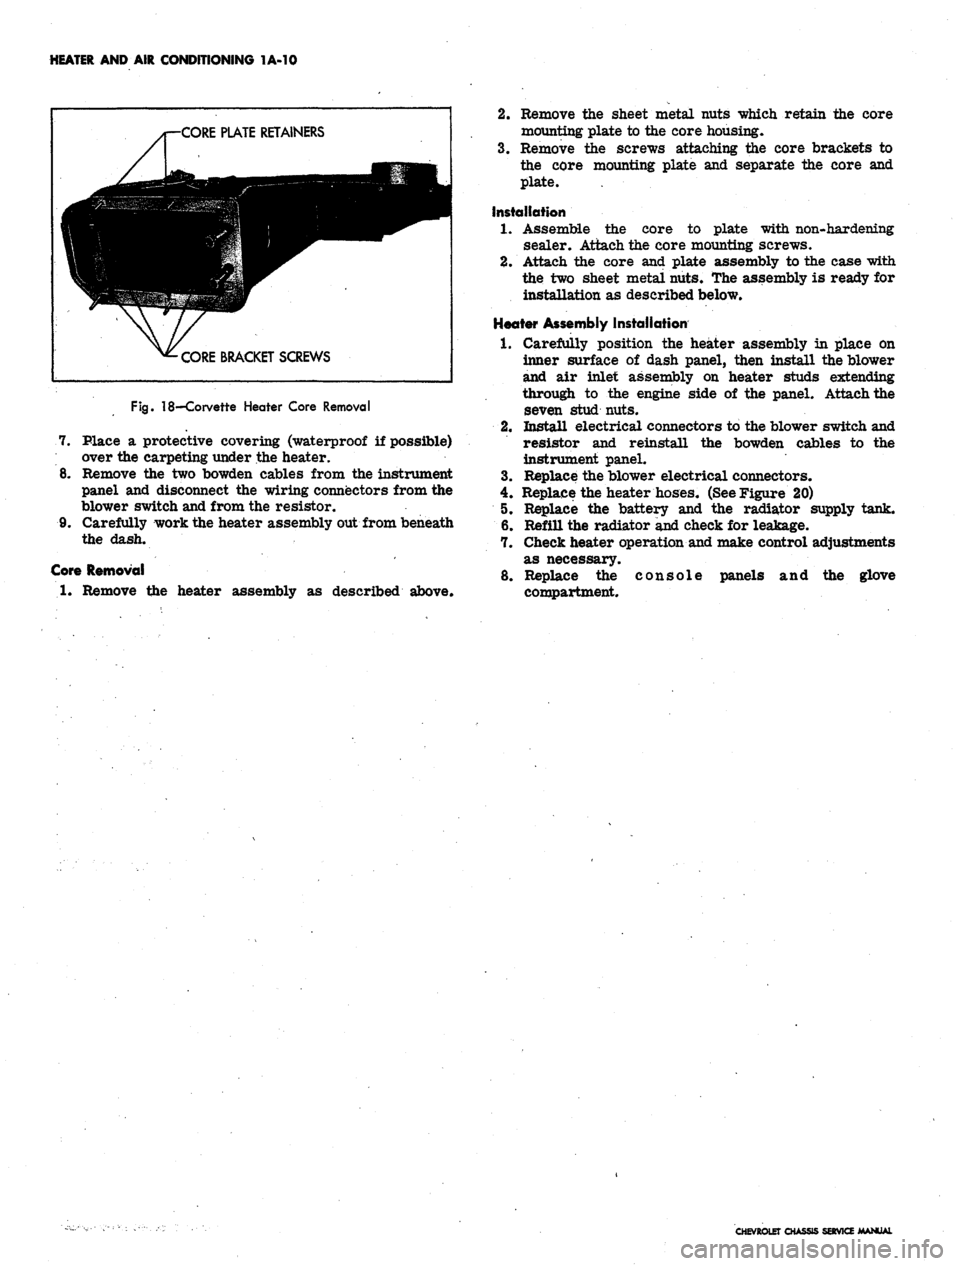 CHEVROLET CAMARO 1967 1.G Chassis Workshop Manual 
HEATER AND AIR CONDITIONING 1A-10

PLATE RETAINERS

CORE BRACKET SCREWS

Fig.
 18—Corvette Heater Core Removal

7. Place a protective covering (waterproof if possible)

over the carpeting under the